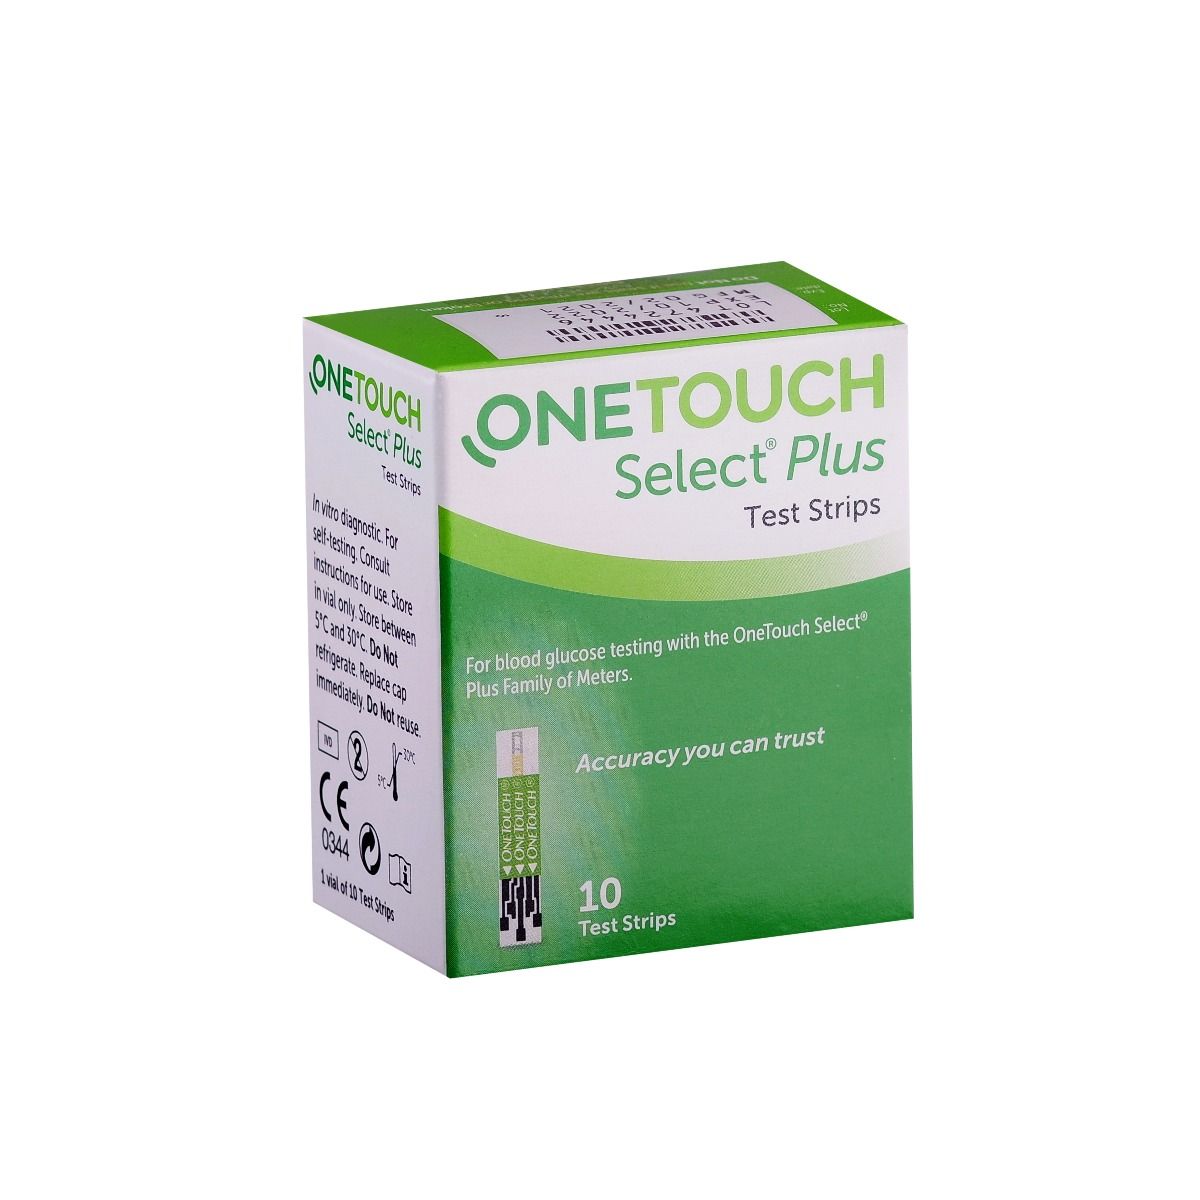 OneTouch Select Plus Test Strips, 10 Count, Pack of 1 